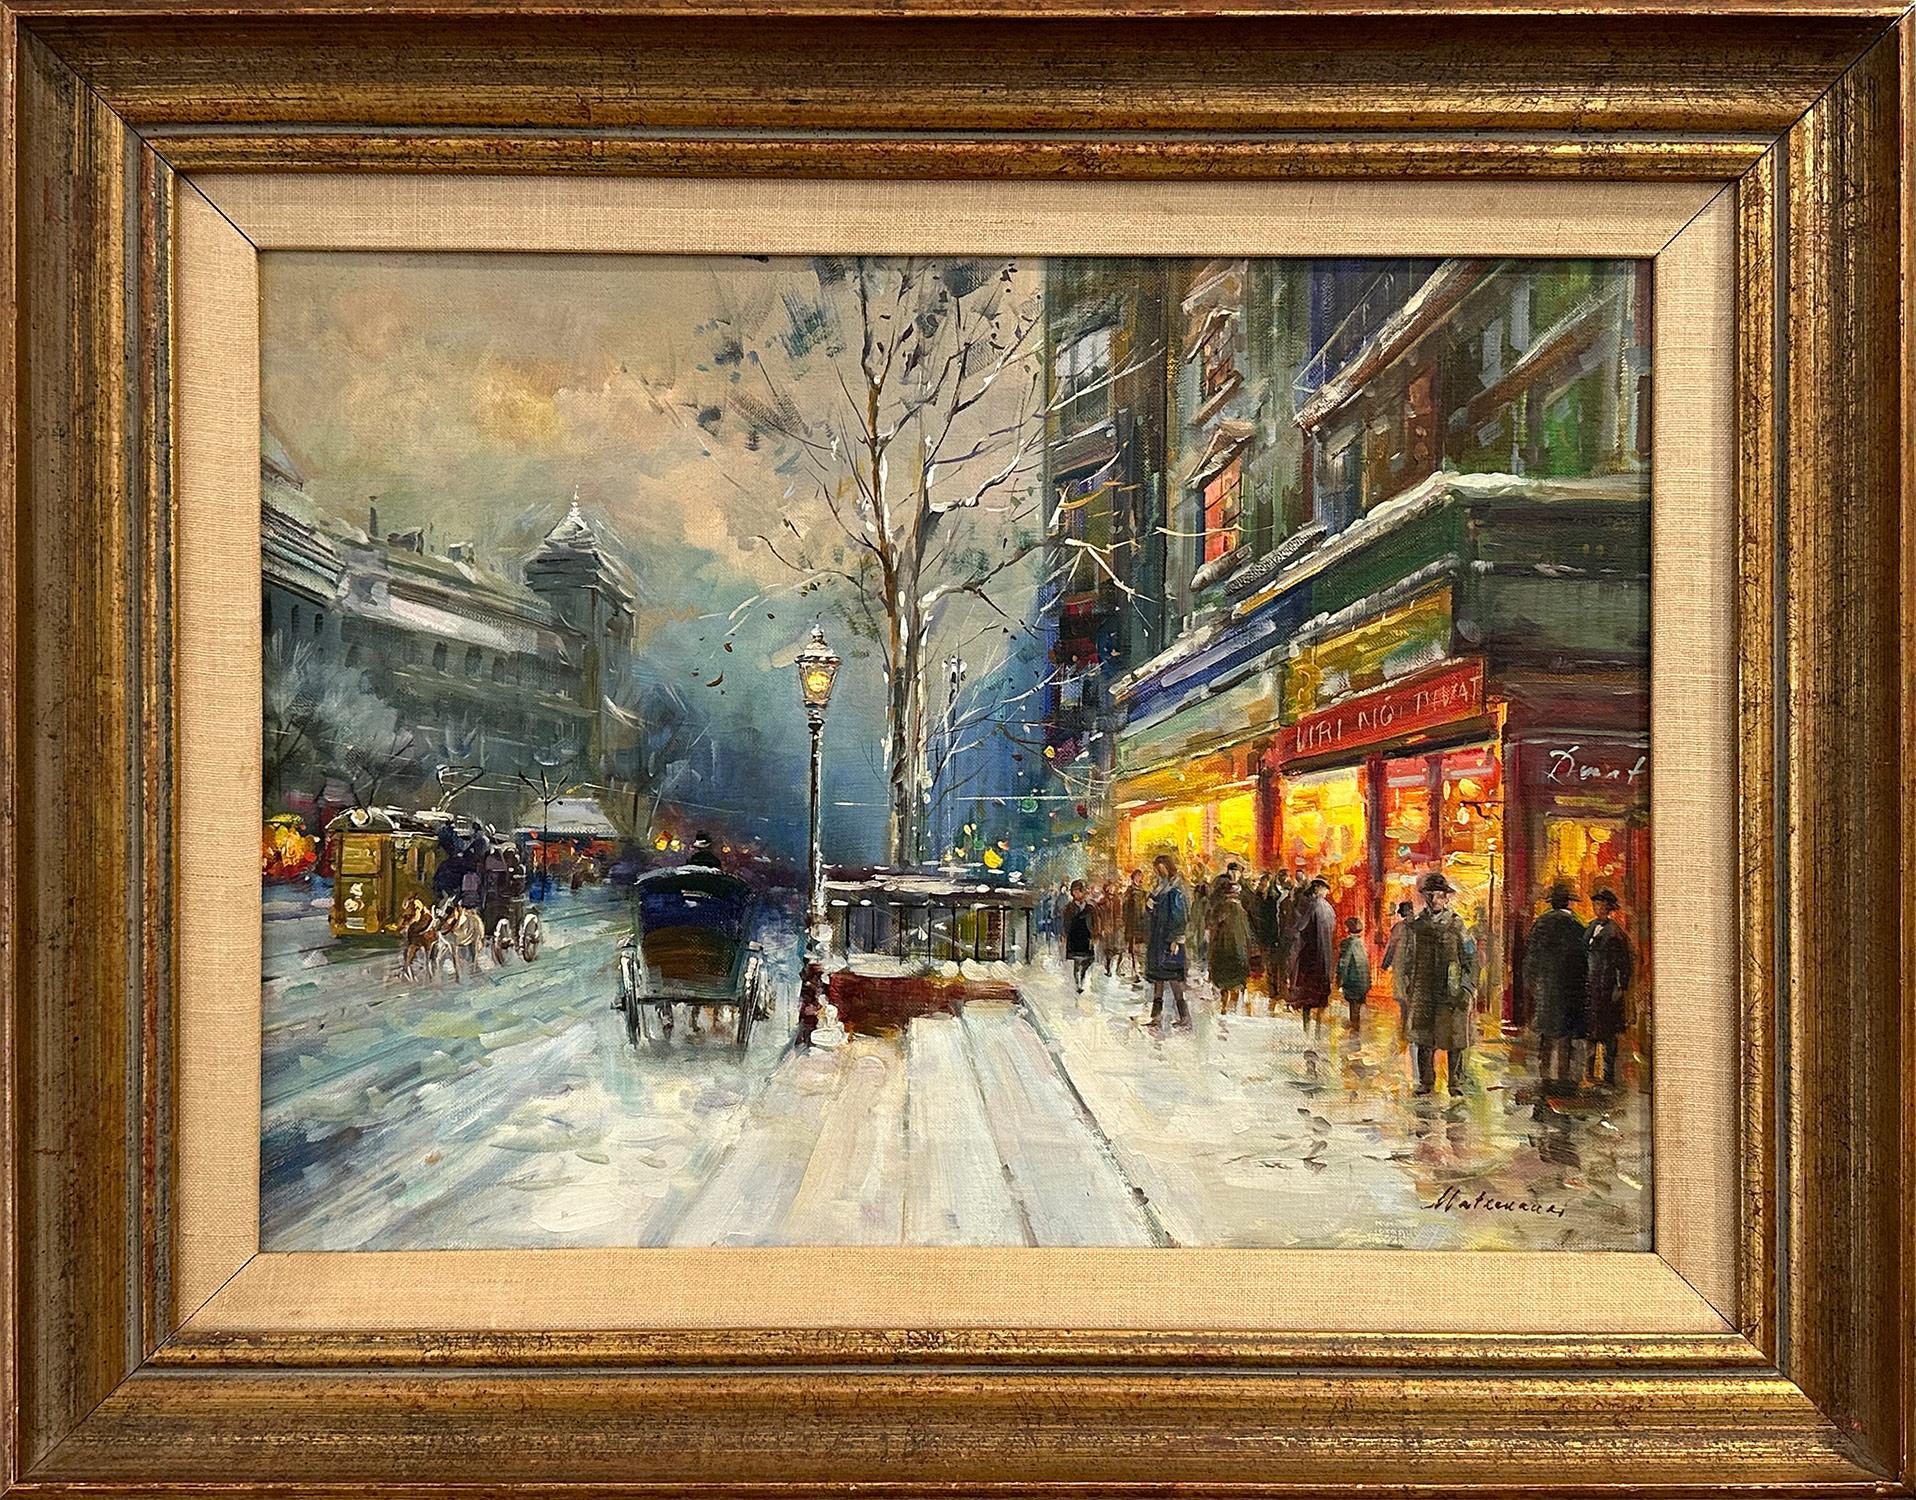 Hugo Matzenauer Figurative Painting - "Budapest in Snow" 20th Century Hungarian Impressionist Oil Painting on Canvas